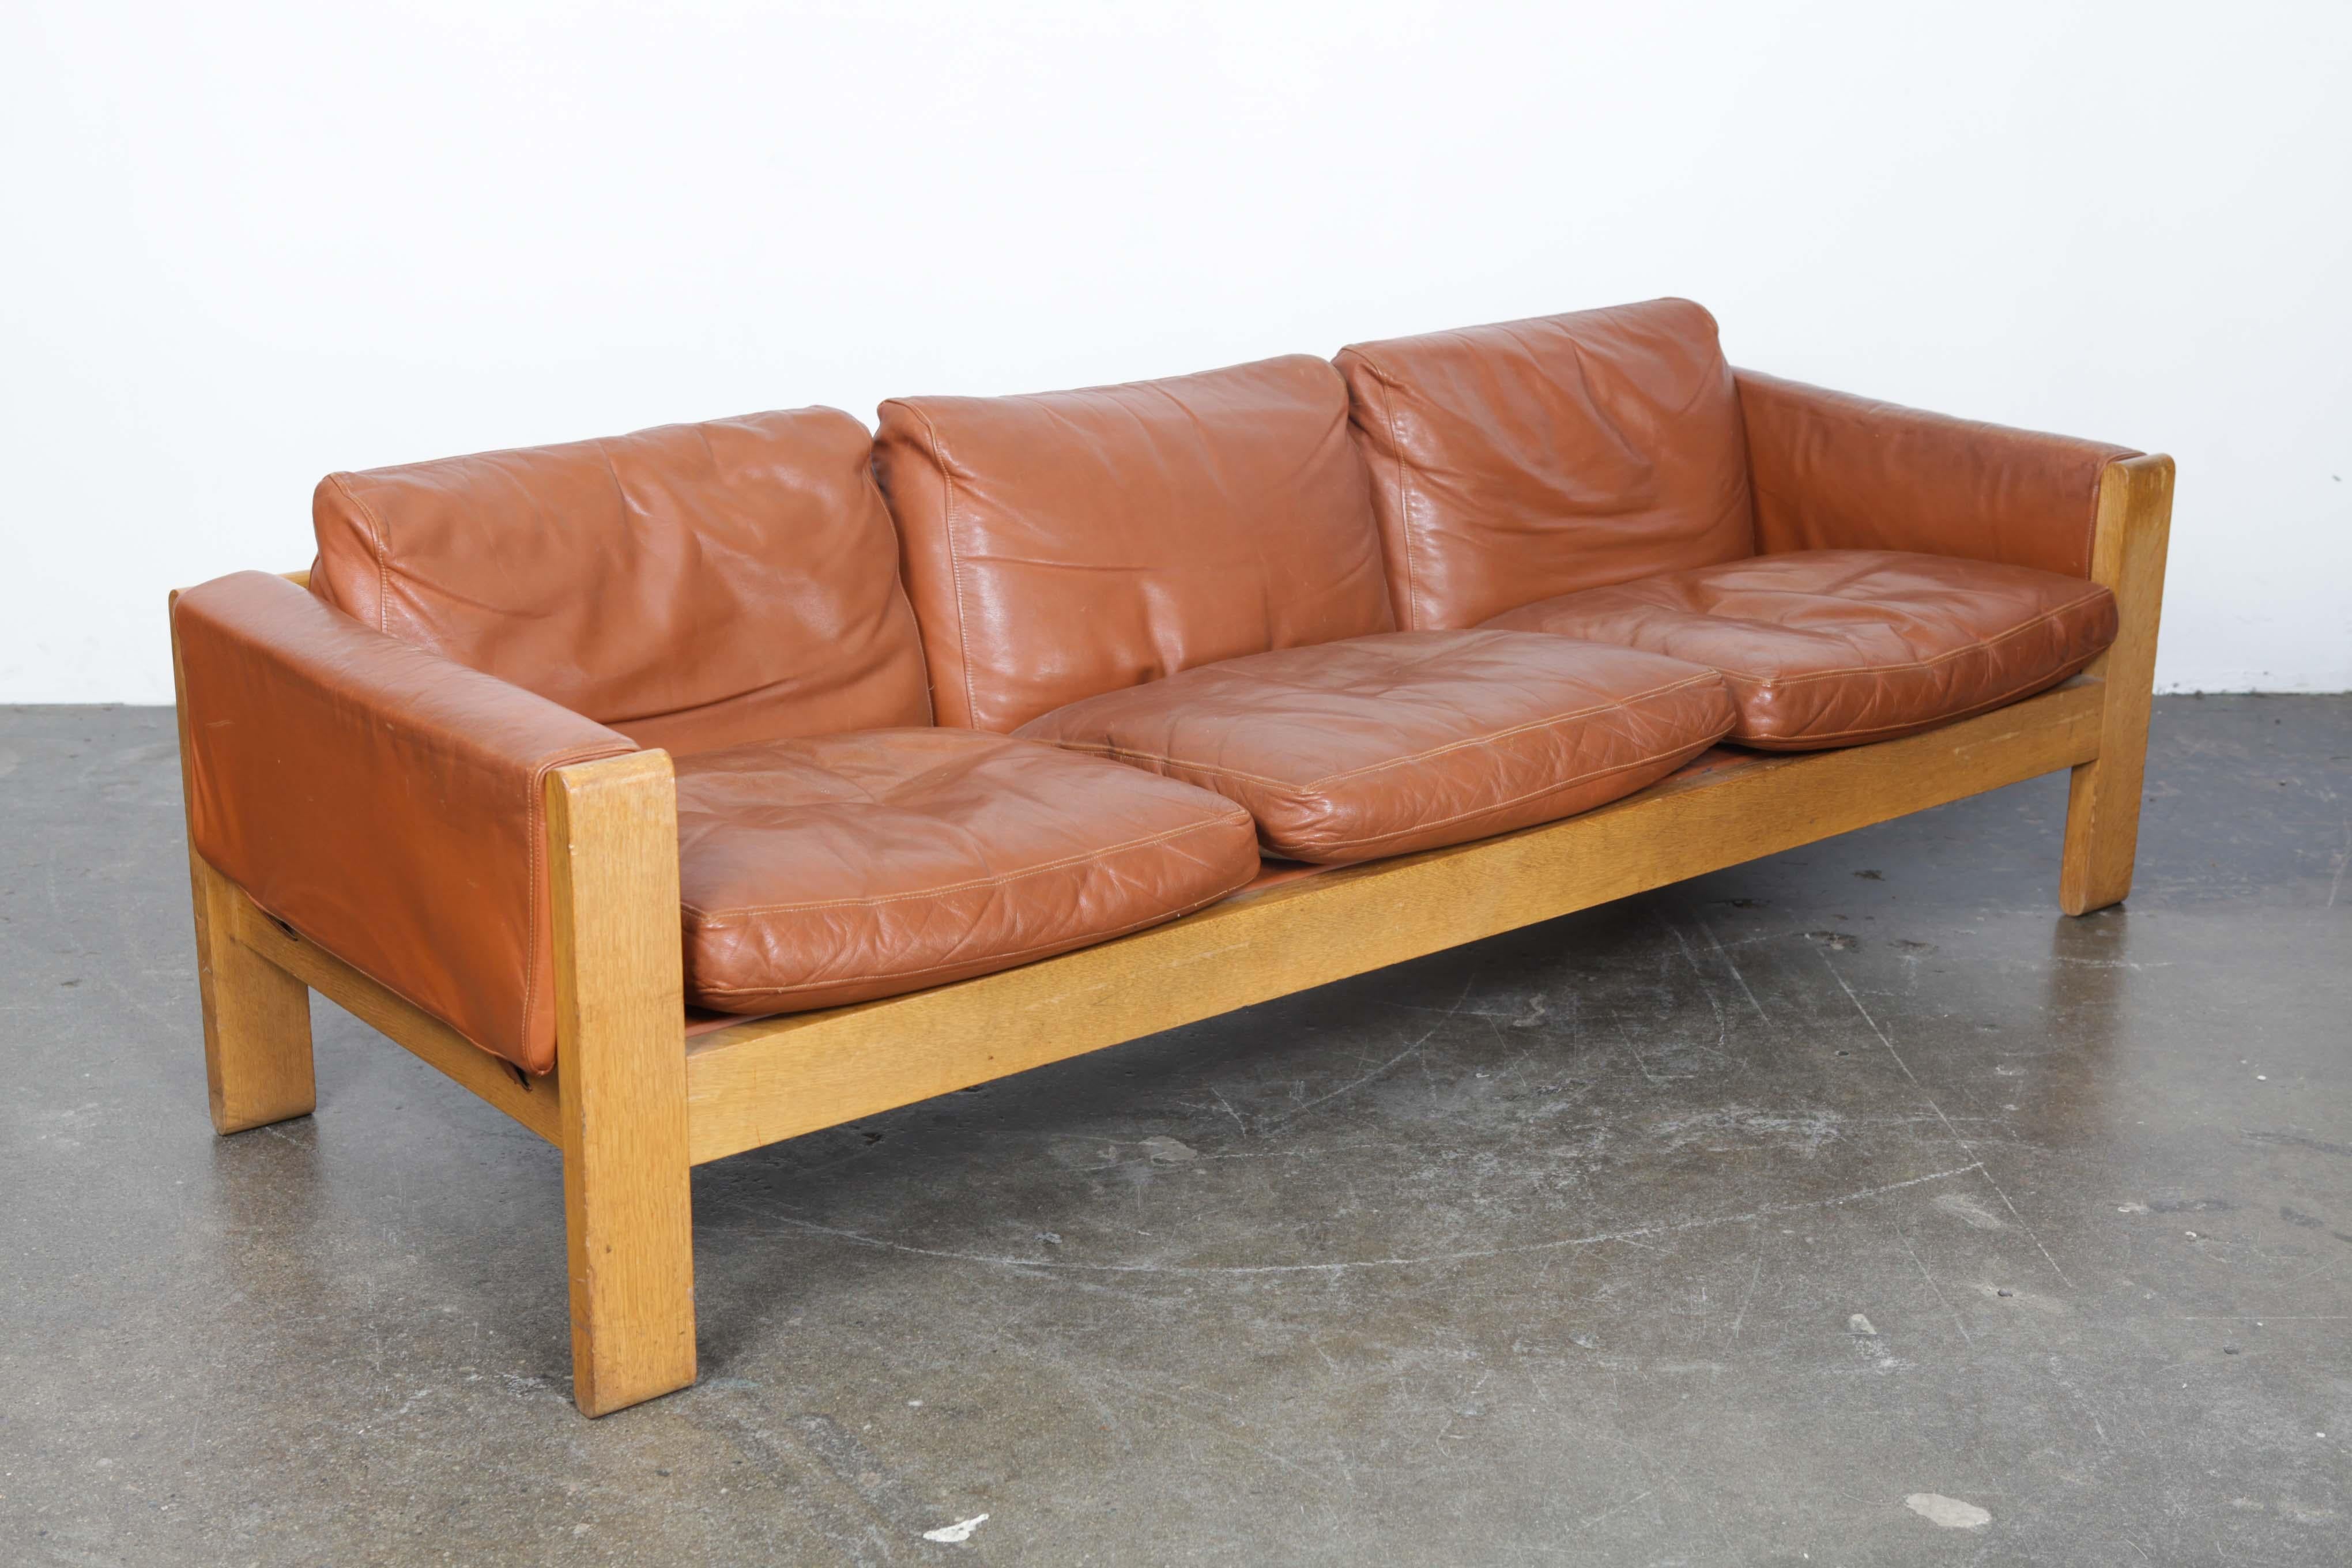 Midcentury sofa in cognac leather with loose cushions and an oak wooden block frame, produced by OPE, Sweden, 1970s. Original leather has no tears or cracks and shows a nice patina, consistent with age. Imported from Sweden to Los Angeles and kept